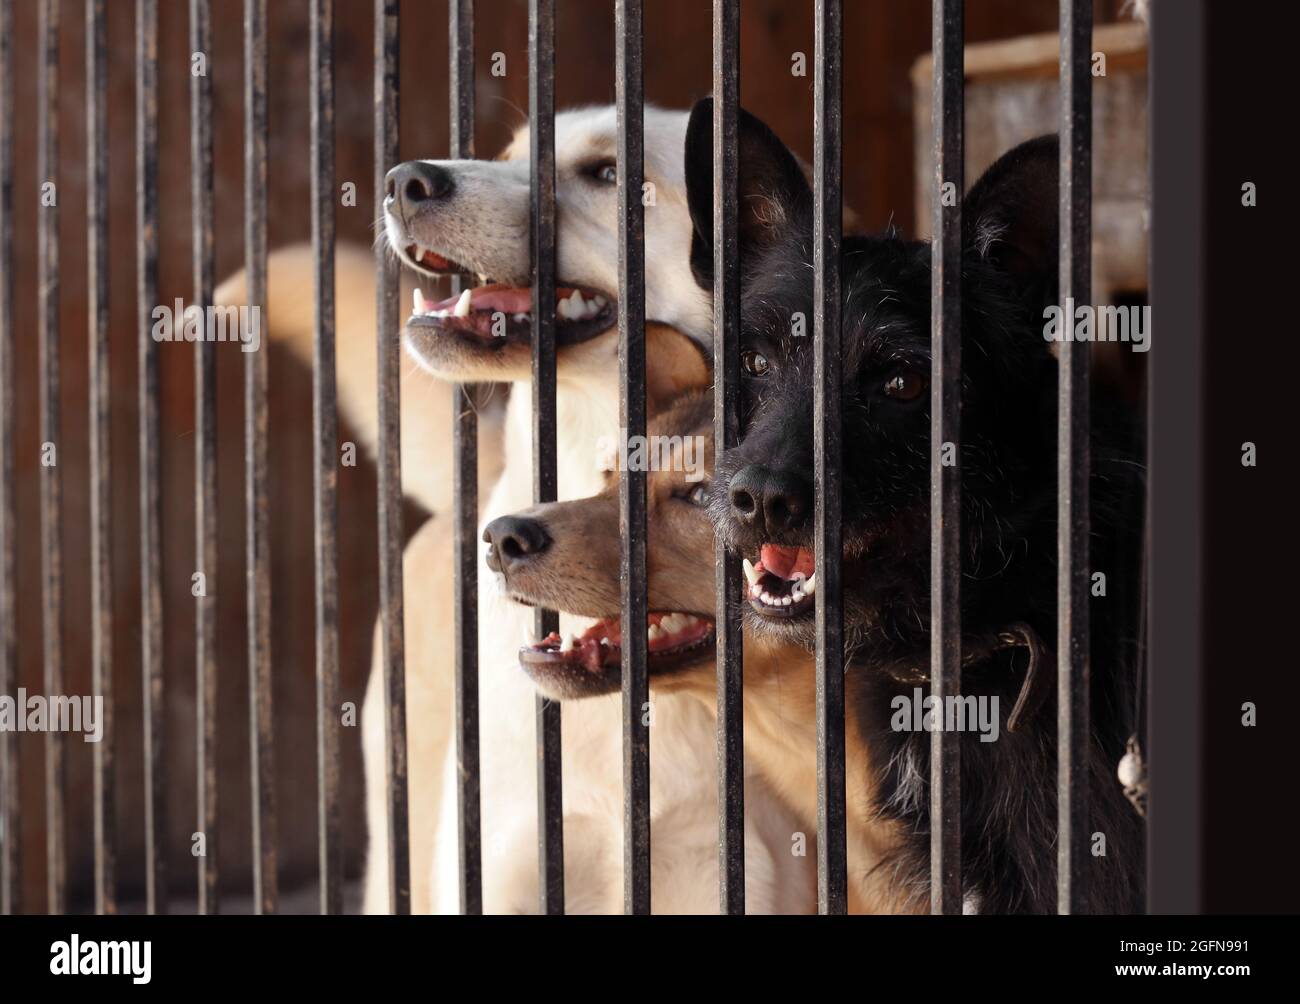 Homeless dogs in animal shelter cage Stock Photo - Alamy